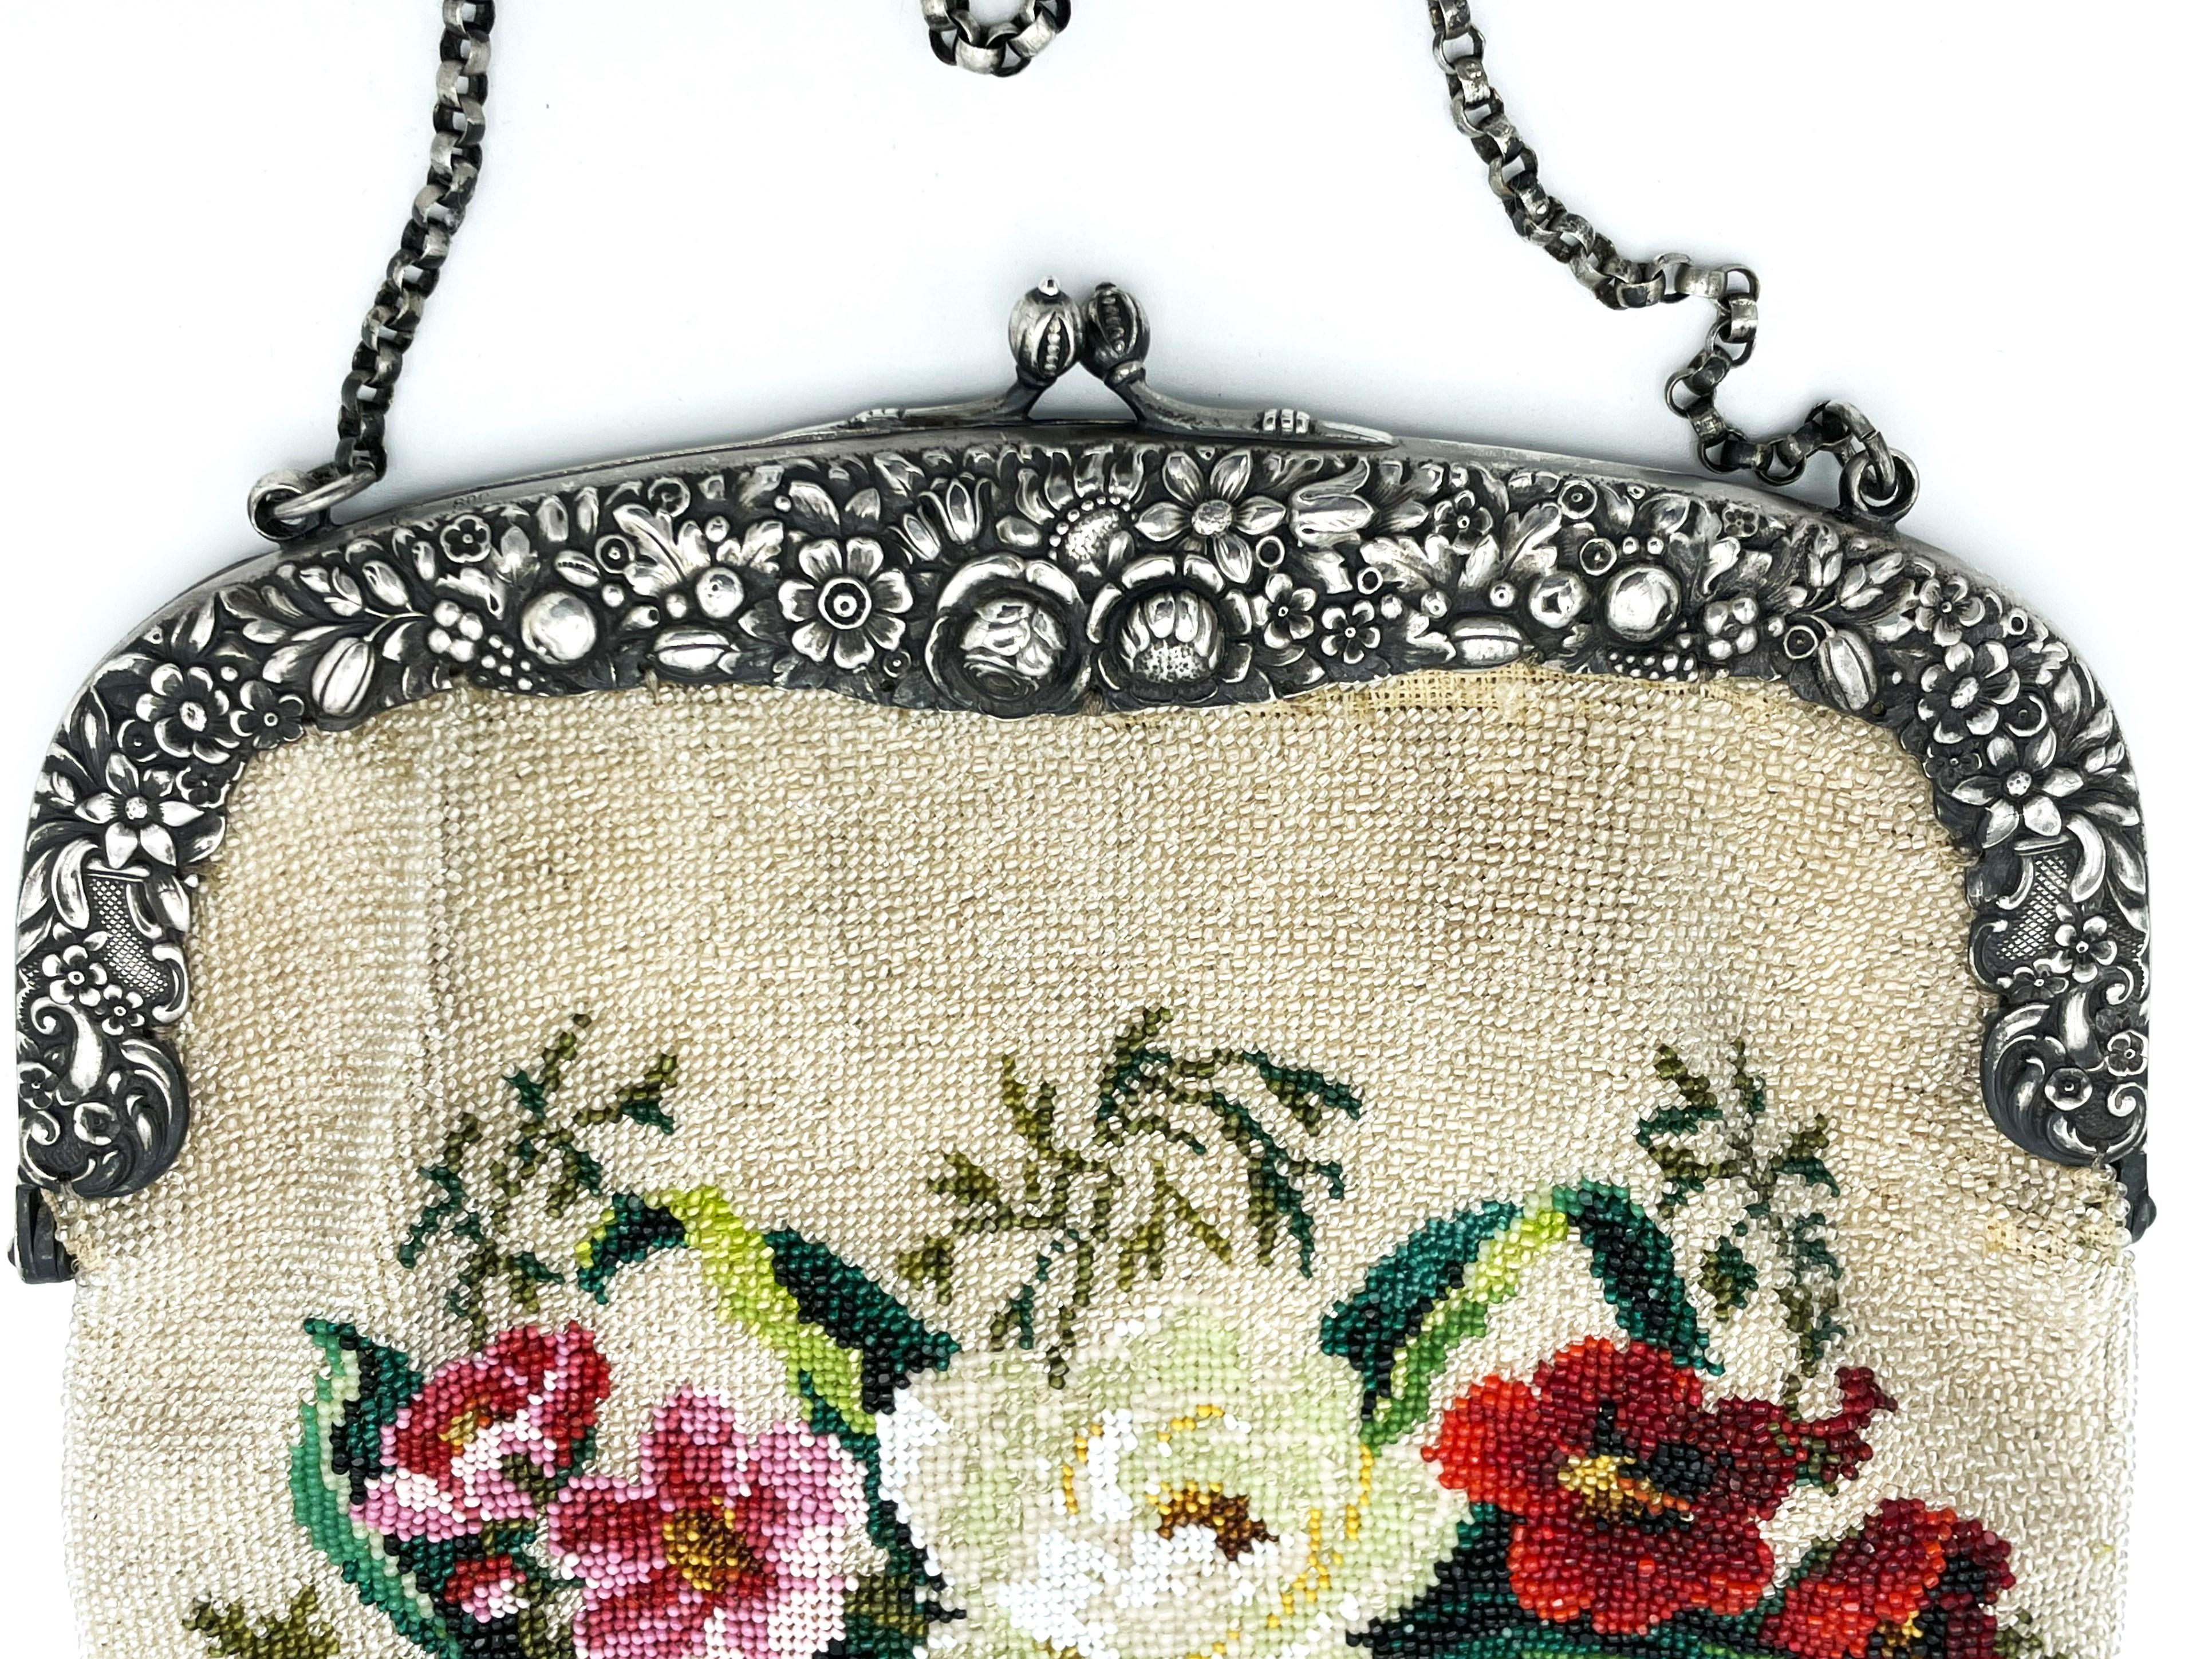 Antique hand-knitted beaded bag with hallmarked silver hanger + chain from 1850s In Excellent Condition For Sale In Stuttgart, DE